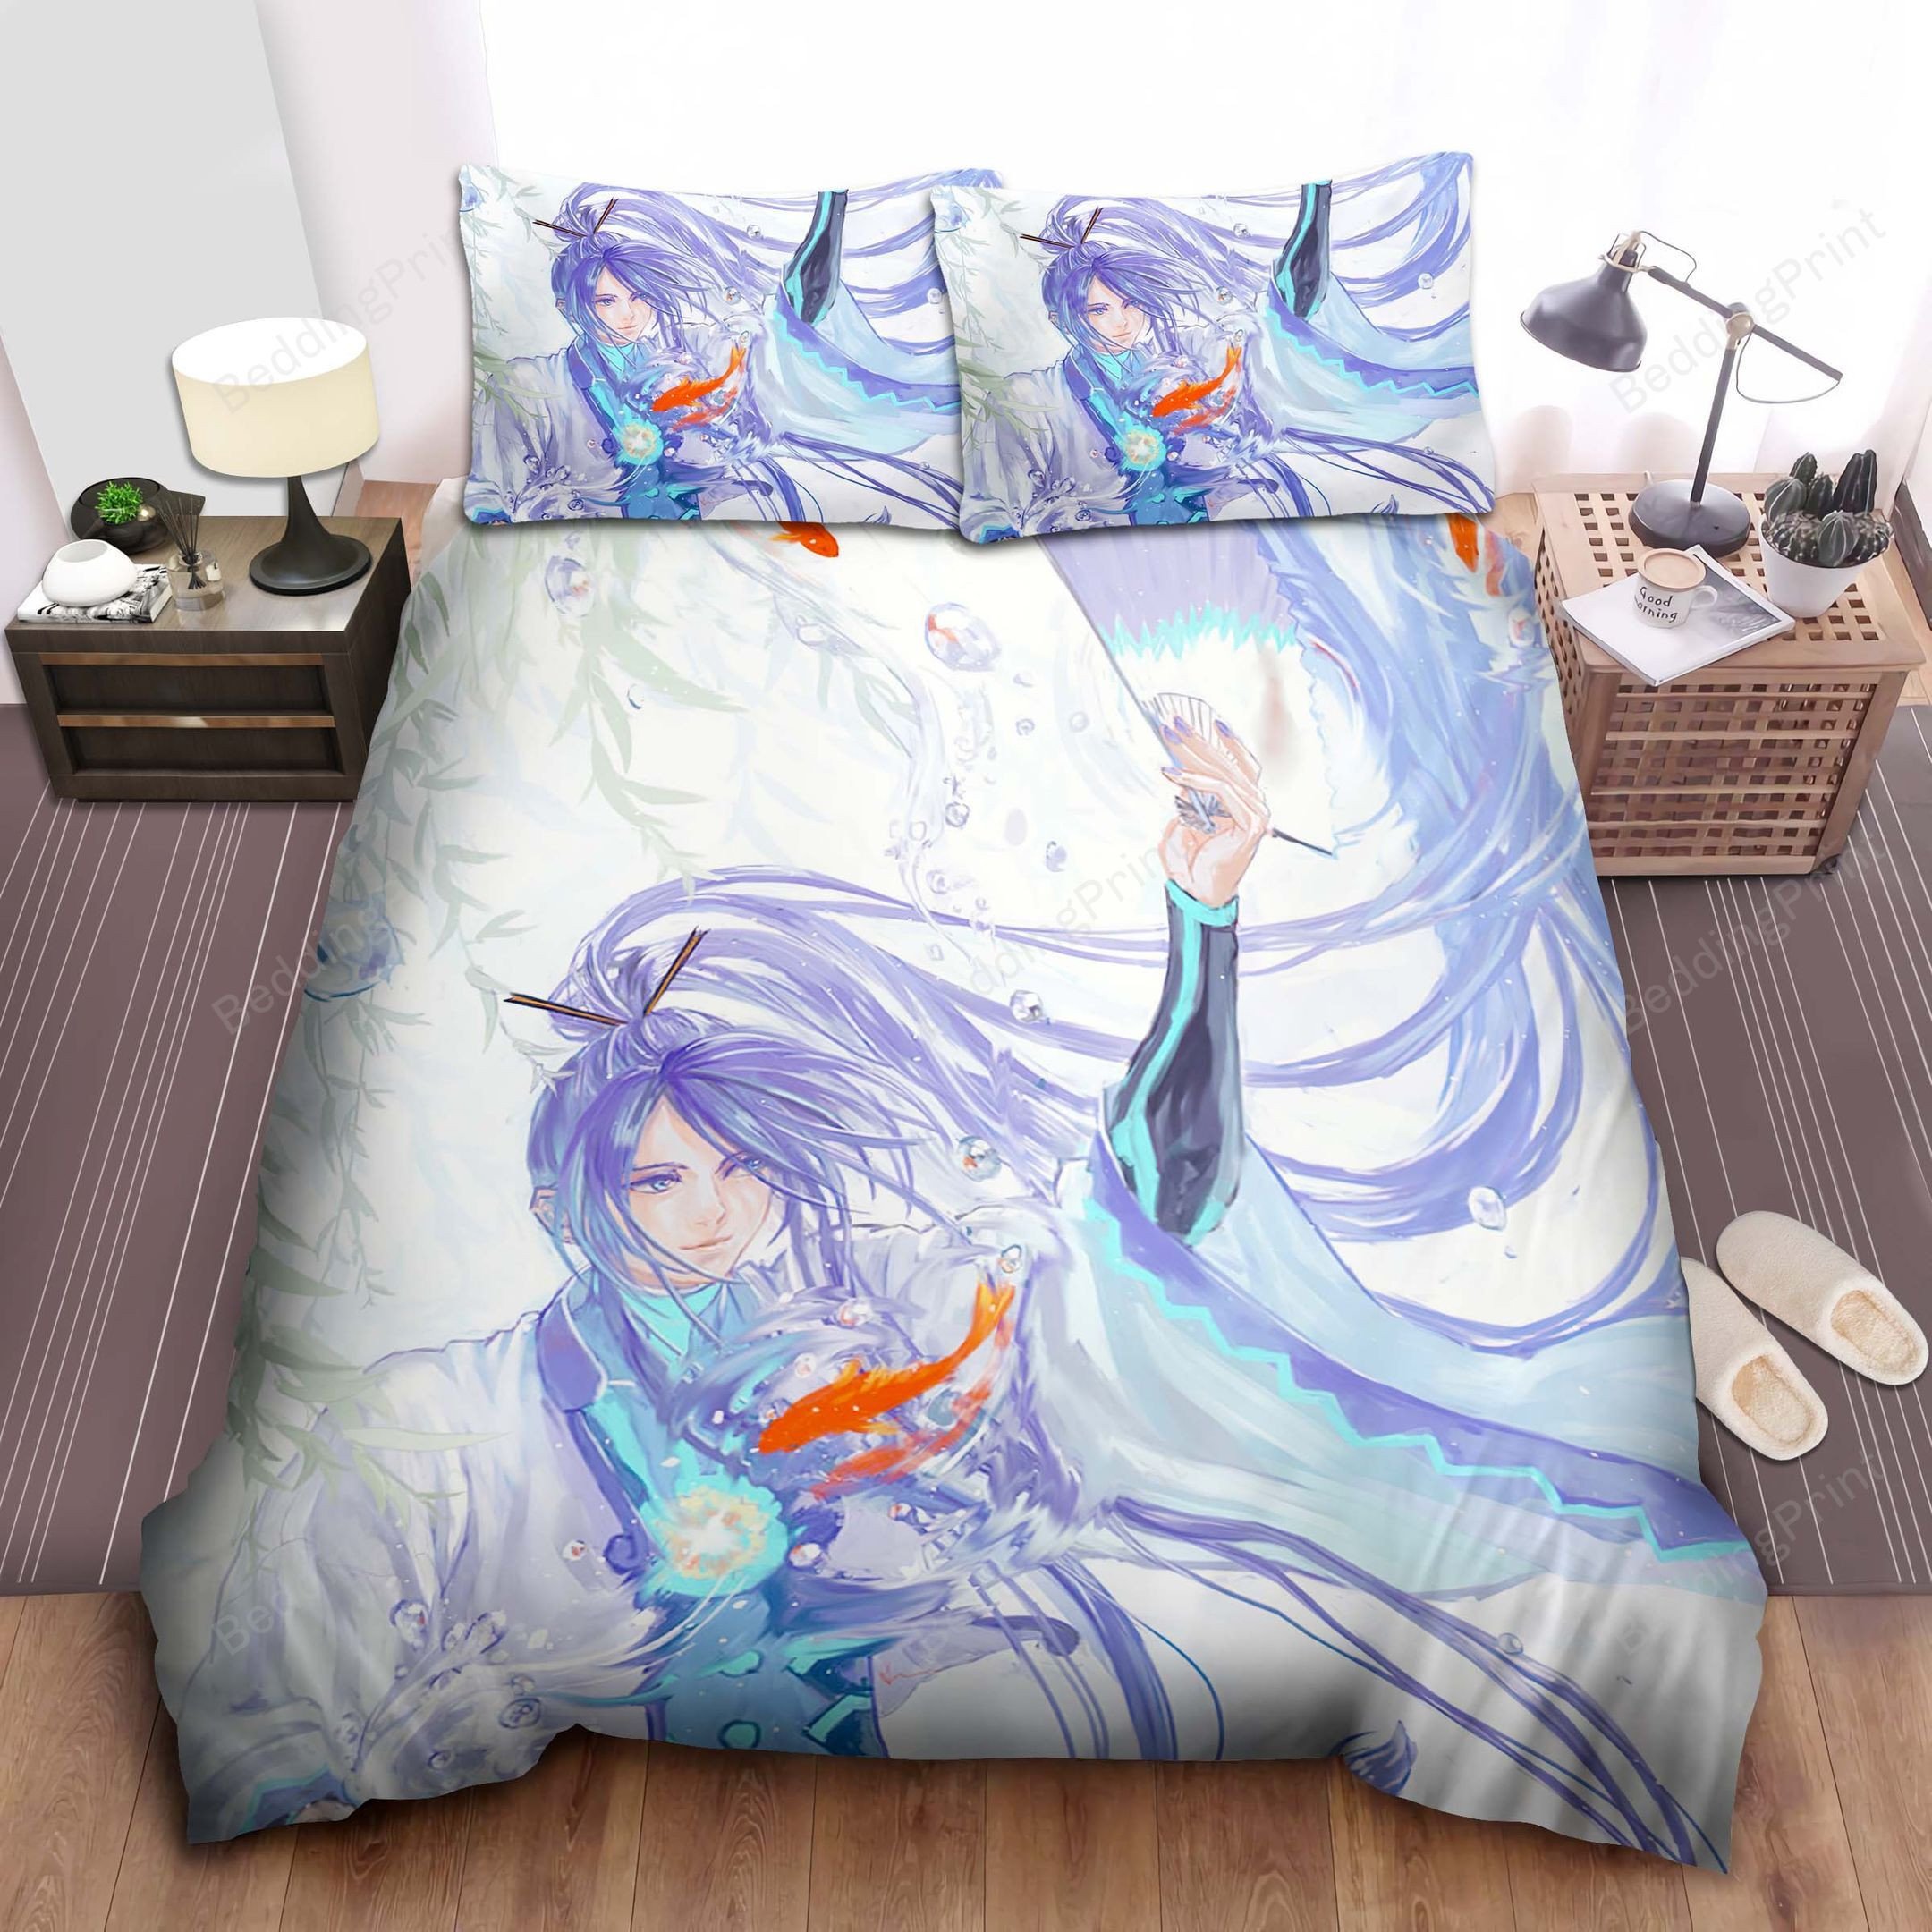 (Gackpoid) Kamui Gakupo &amp; Koi Fishesbed Sheets Duvet Cover Bedding Sets. PLEASE NOTE: This is a duvet cover, NOT a Comforter